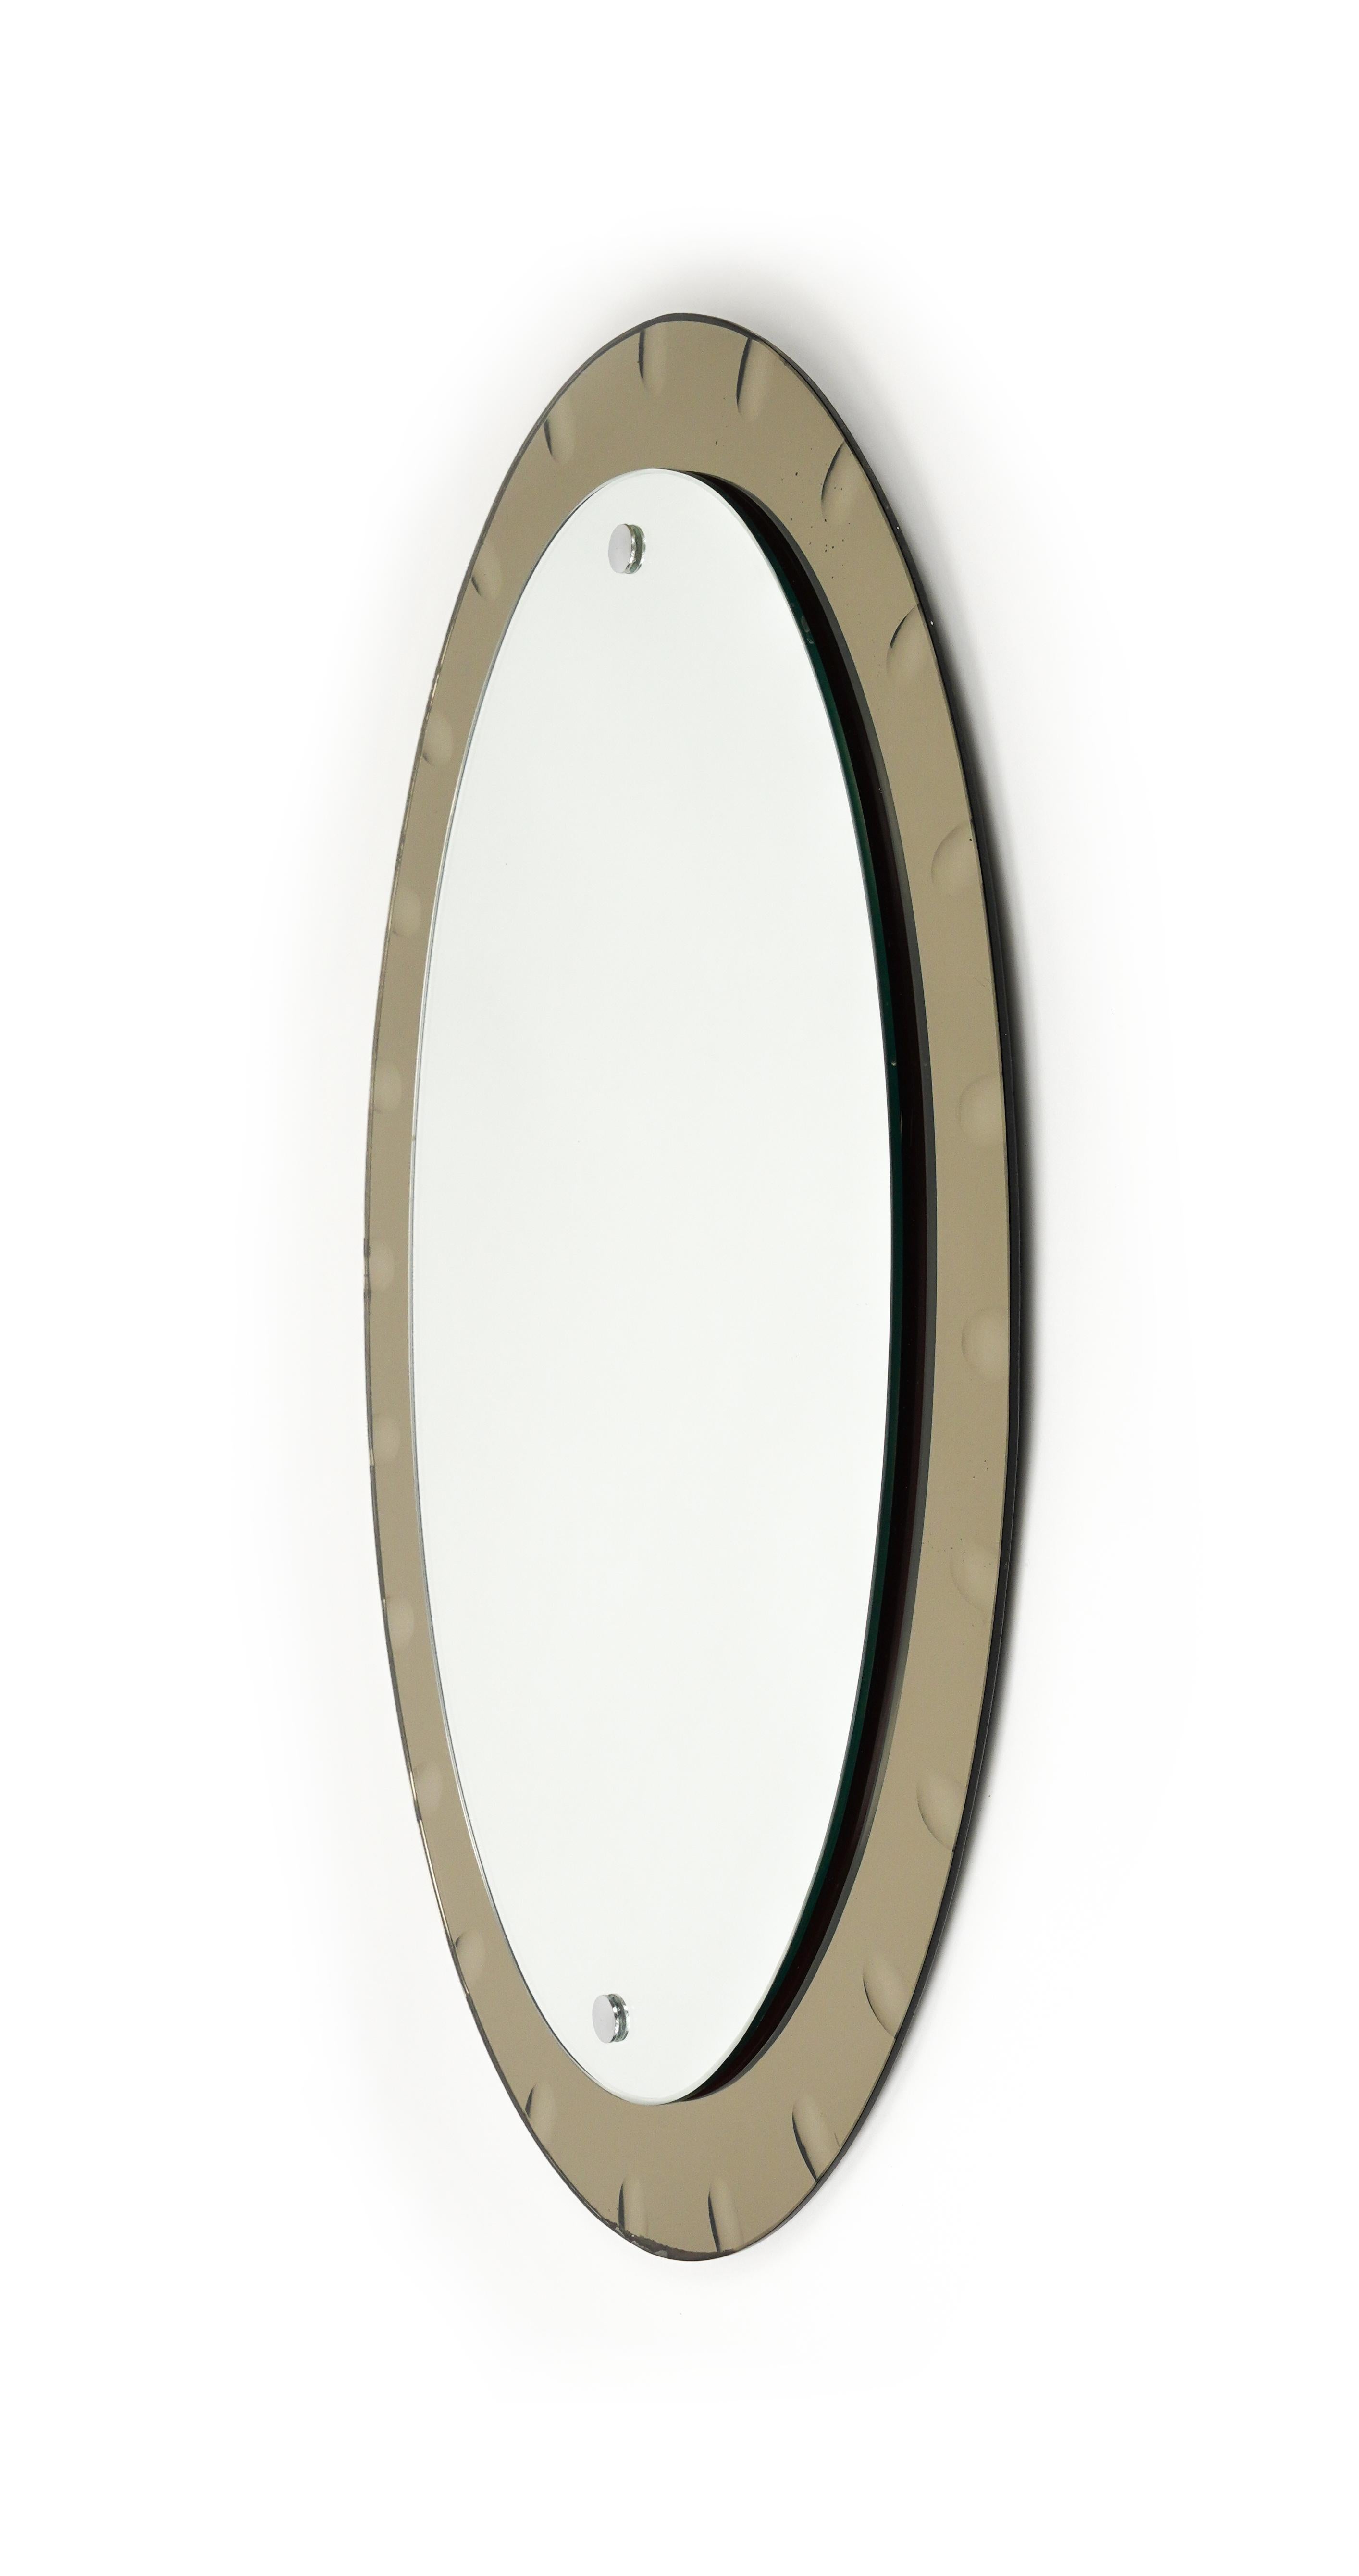 Metal Midcentury Oval Wall Mirror with Bronzed Frame by Cristal Arte, Italy 1960s For Sale